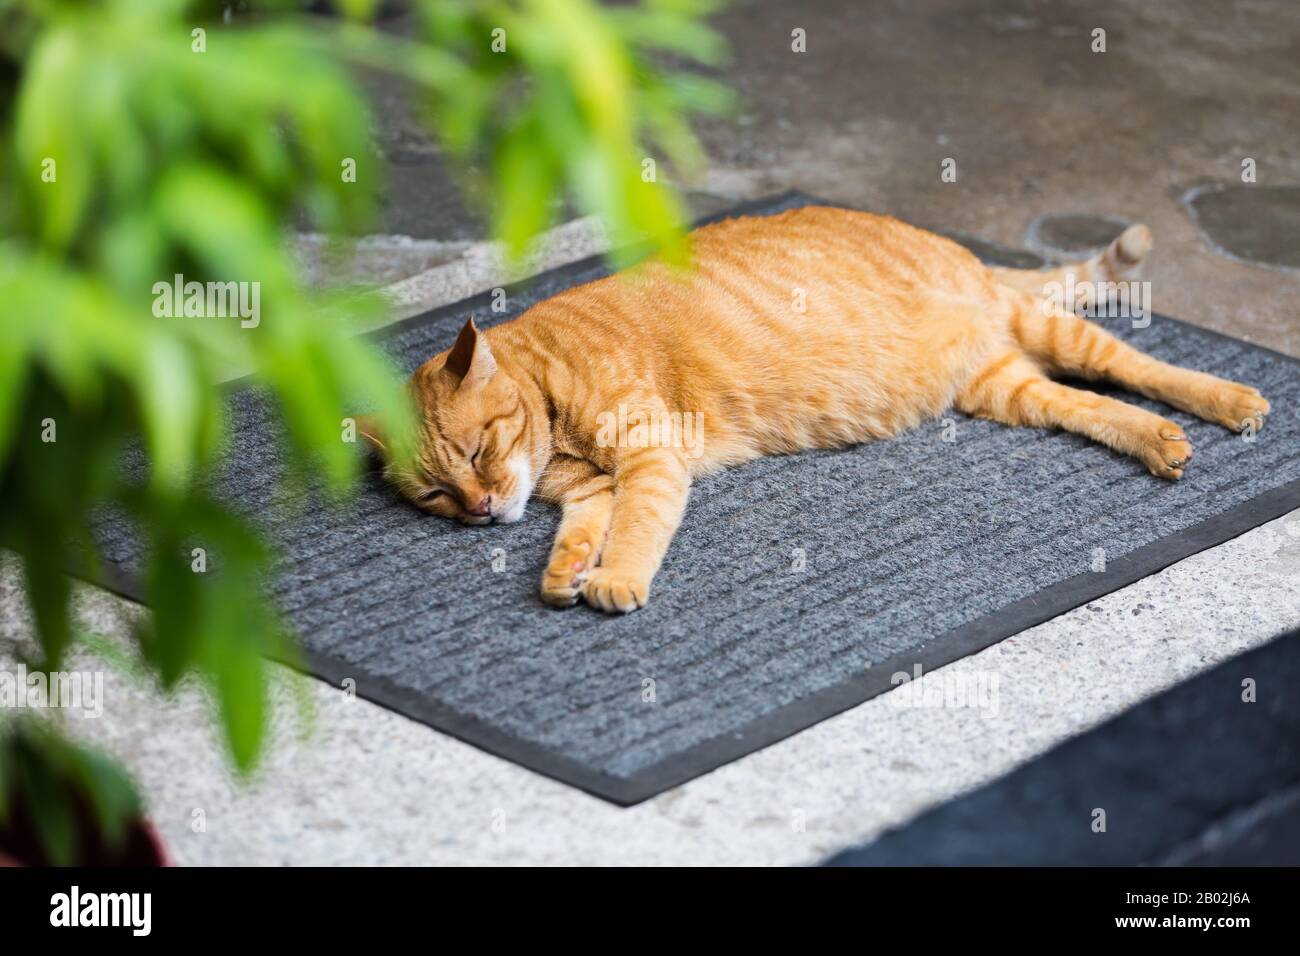 An orange colour tabby cat sleeping on the mat out in the street, Singapore. Stock Photo